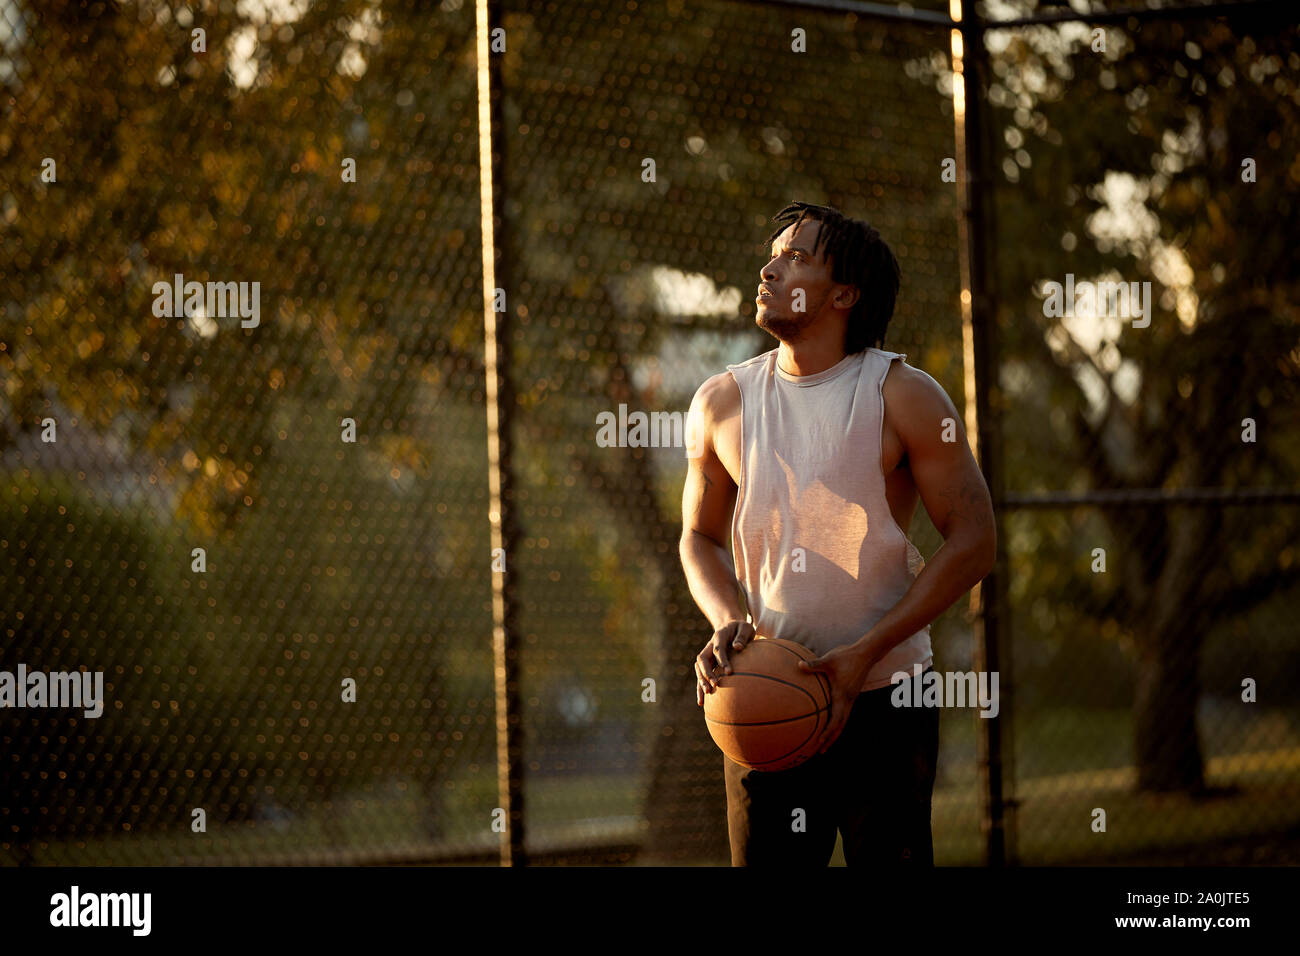 African-American man playing basketball outdoors Stock Photo